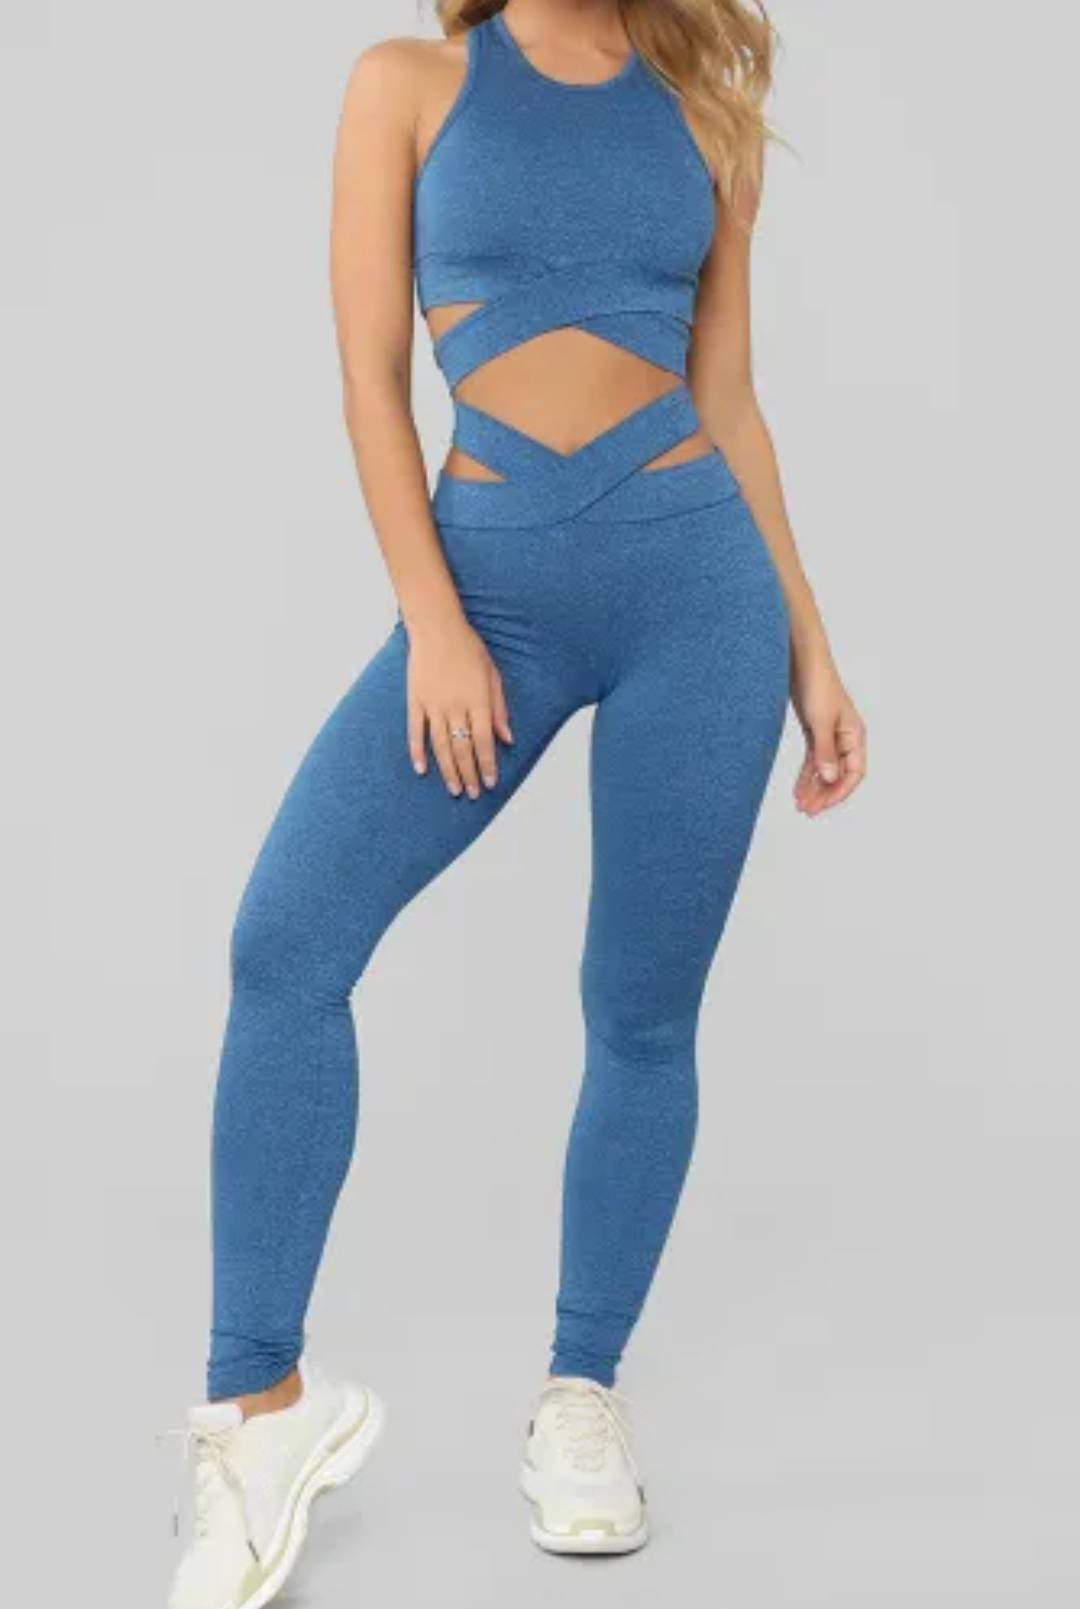 Crossover Active Wear Set